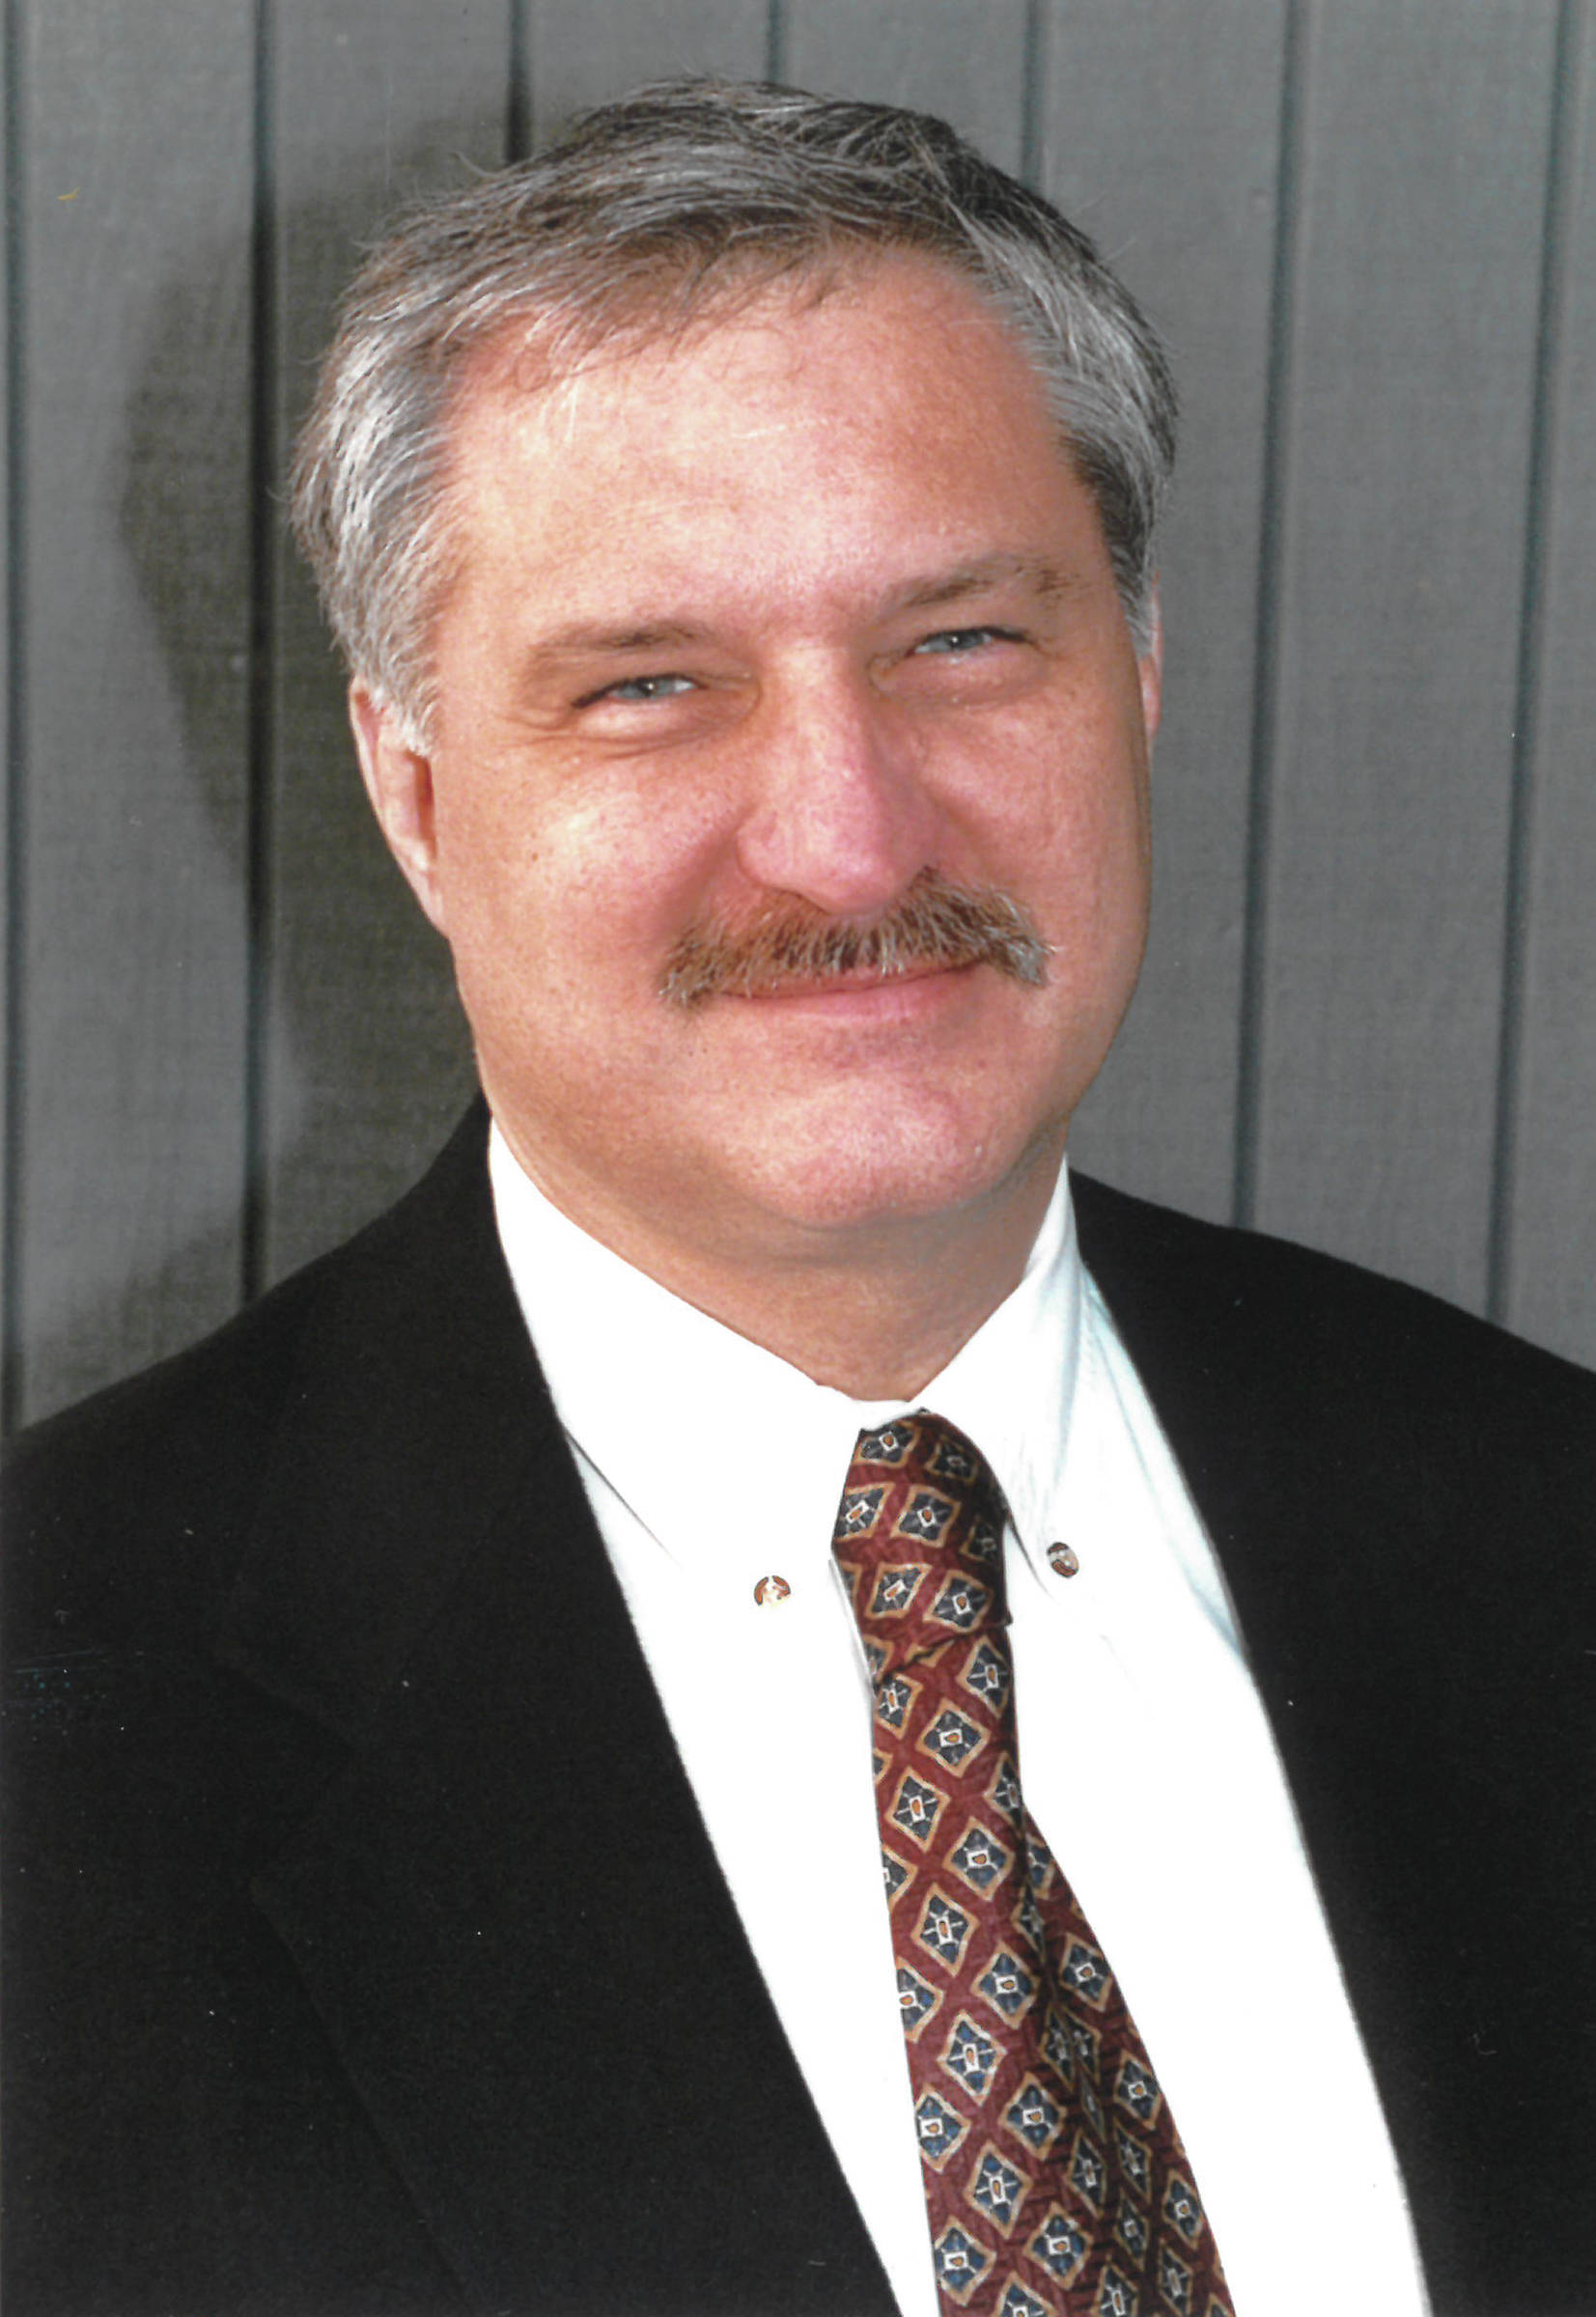 Gary Thomas in a January 2002 photo after he was promoted to Homer News editor and publisher. (Homer News file photo)